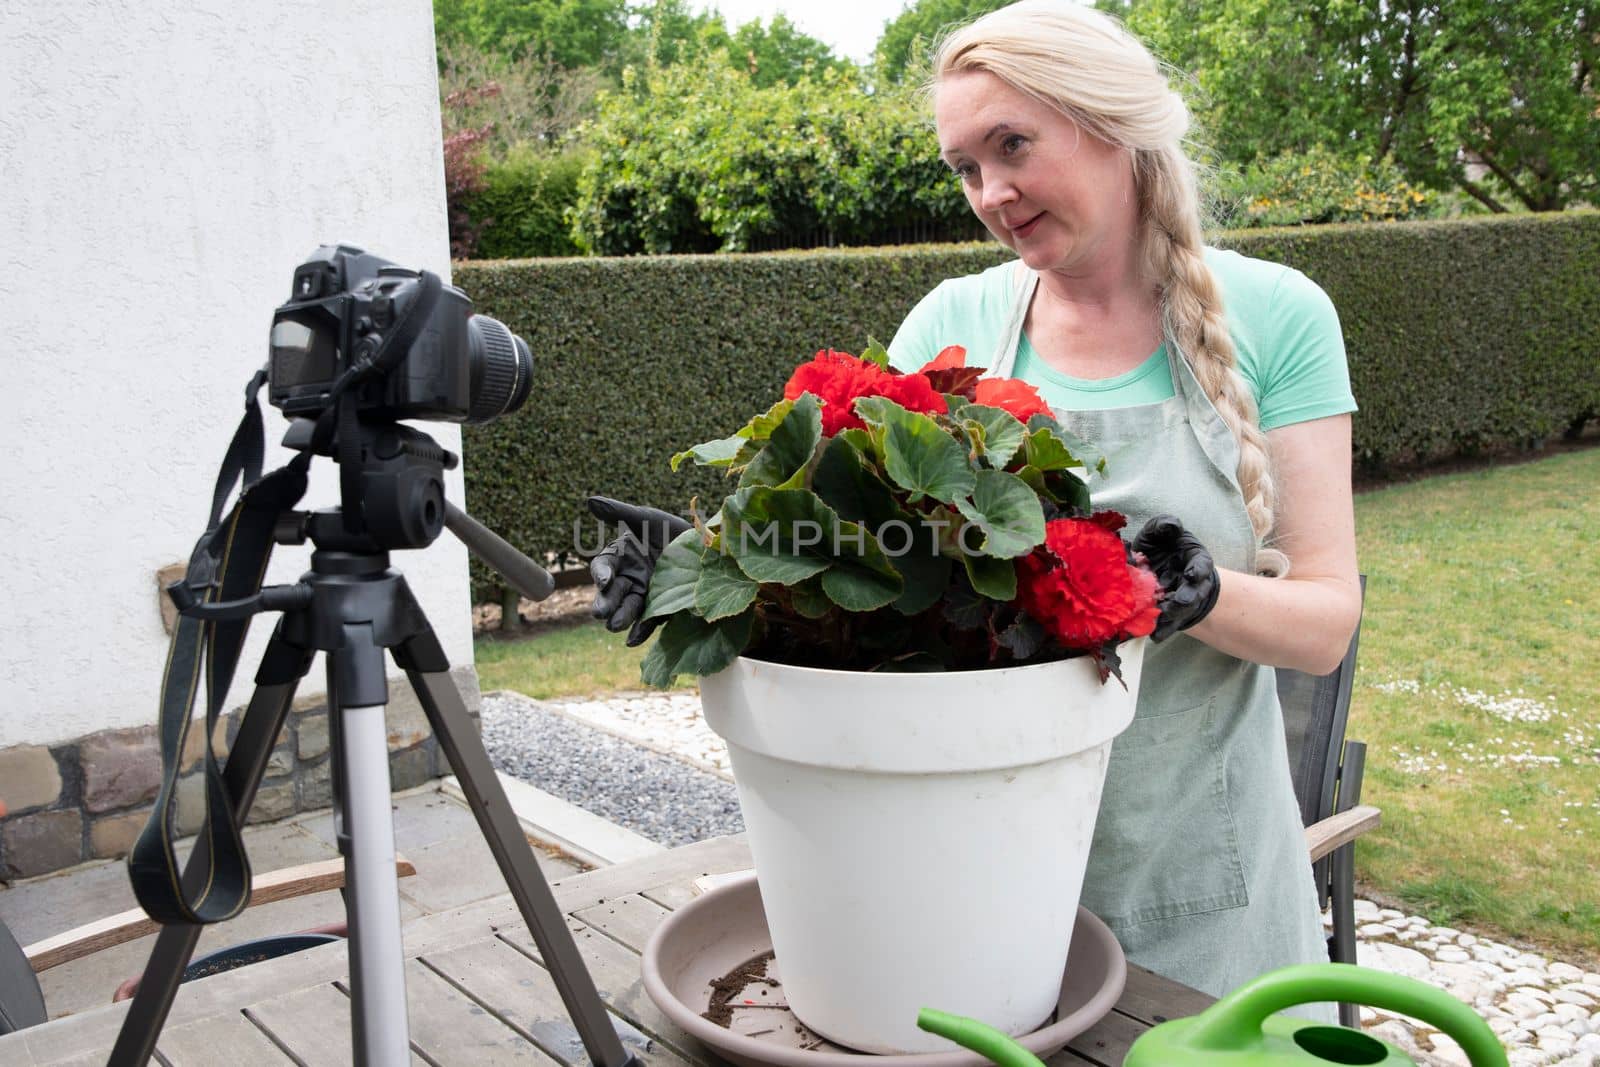 Middle-aged blonde woman watering seedlings of red begonia flower while blogging on social media about gardening, how to transplant flowers into a large pot High quality photo